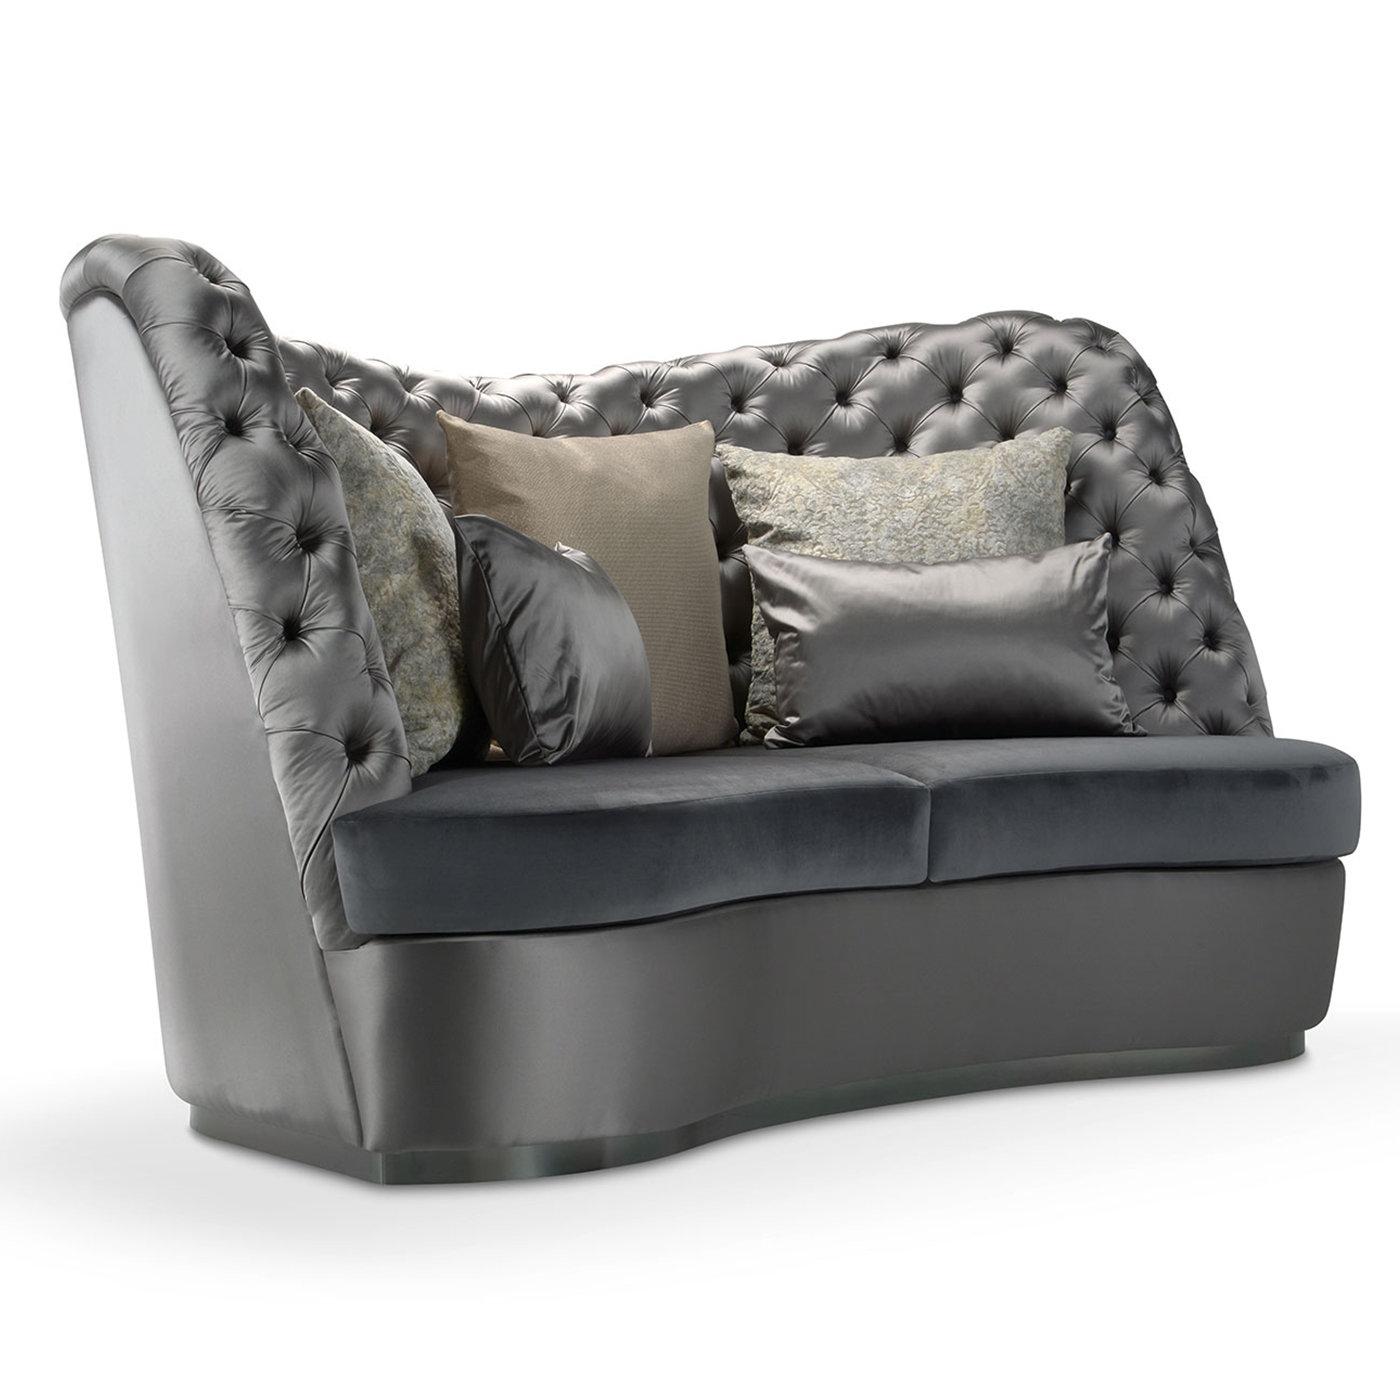 Part of the Thalia Collection named after one of the nine Muses and patron of comedy, this majestic, three-seater sofa exudes excellent sartorial quality. A sinuous plinth base in gunmetal-finished laminate sustains the imposing seat, which is